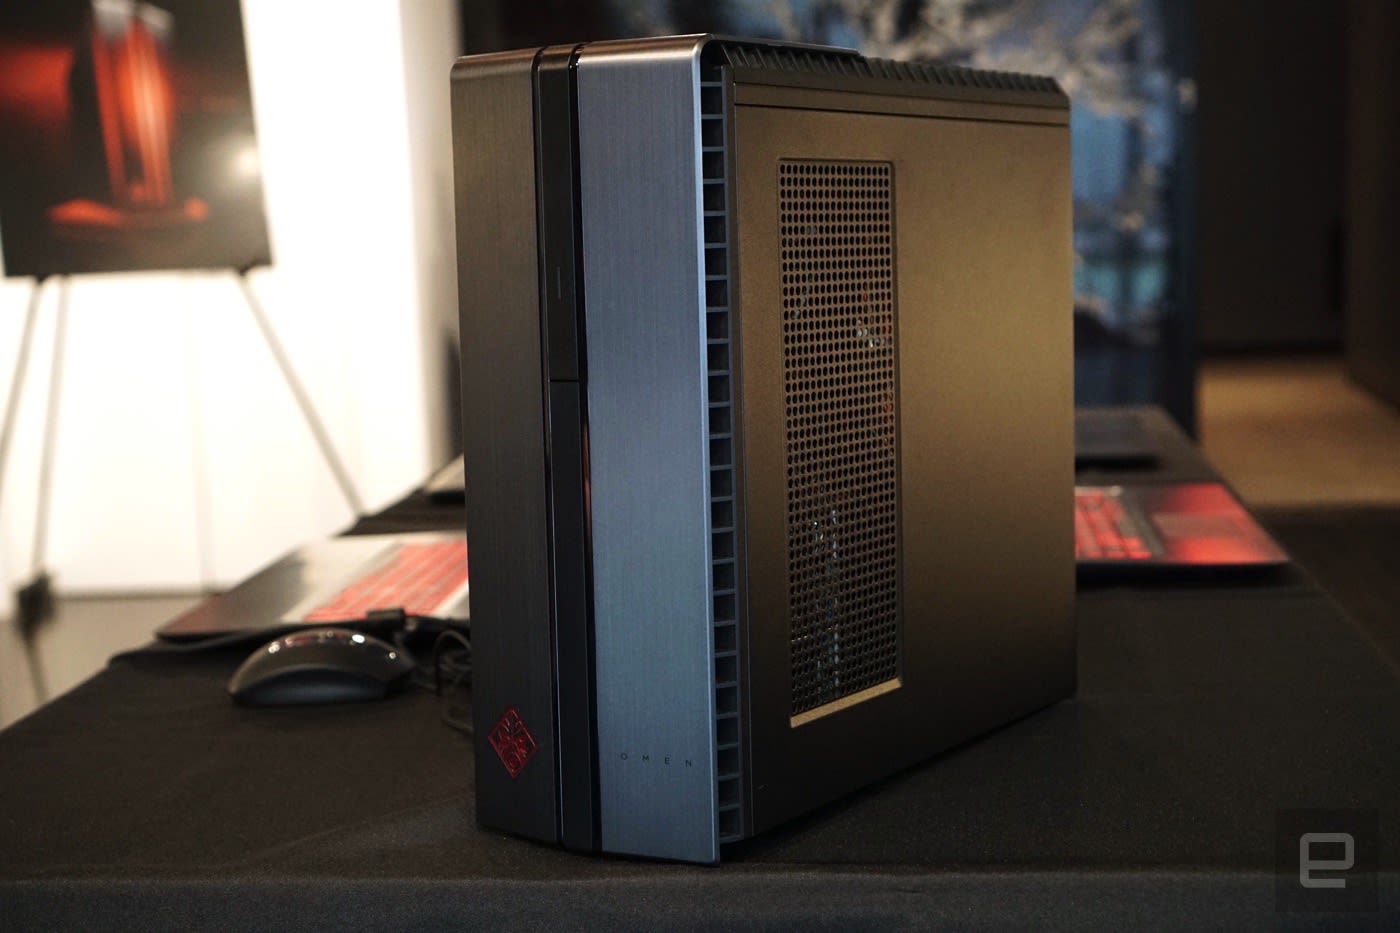 HP goes big on gaming with new Omen laptops and desktop